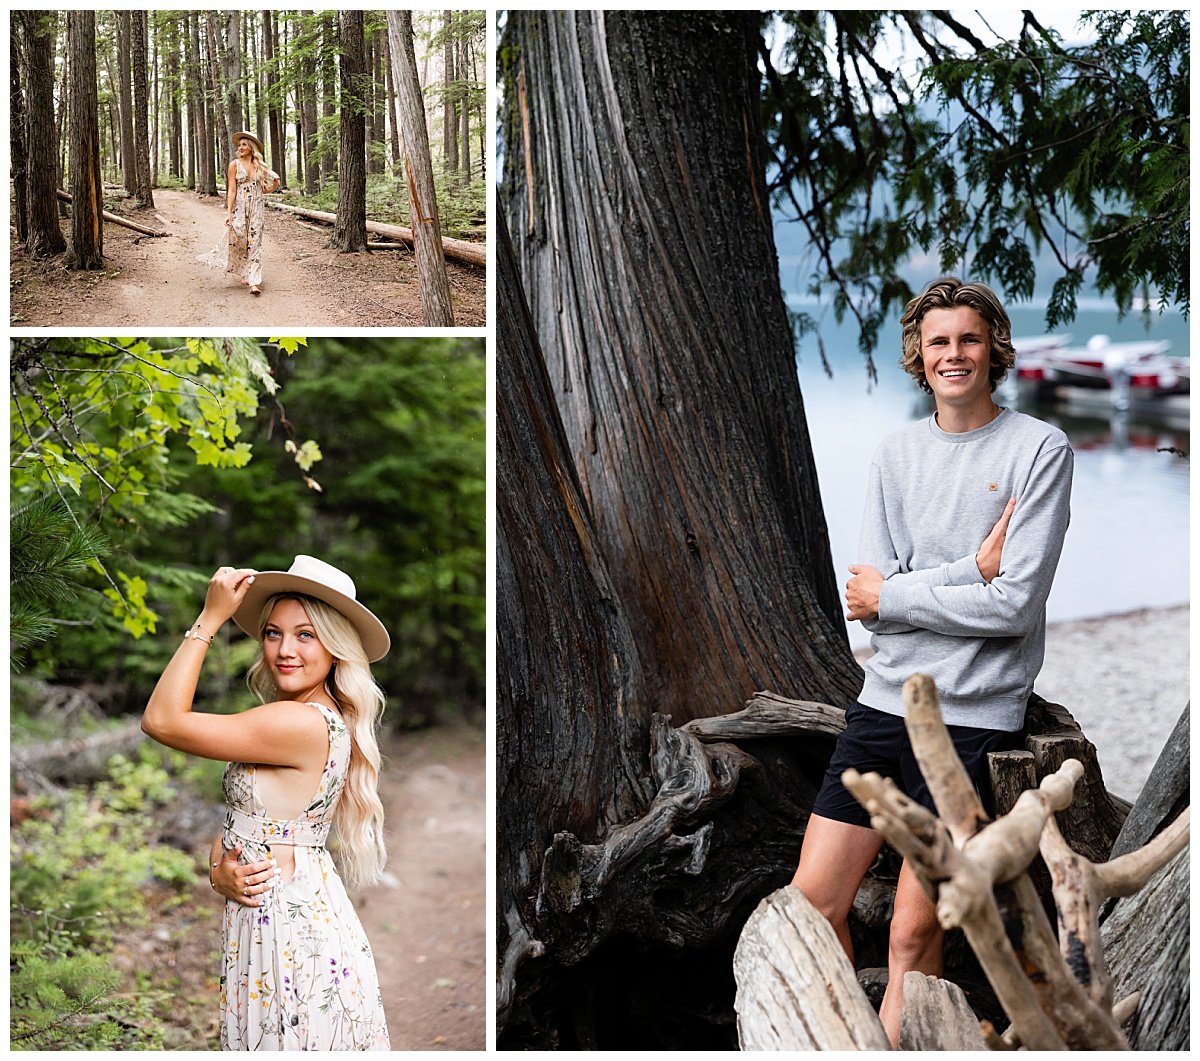 Two photos depict a young blonde woman wearing a tan hat and a long, floral dress walking amongst the tall pines of Montana, while a third photo shows a young man wearing a gray sweatshirt leaning against a tree before Lake McDonald.